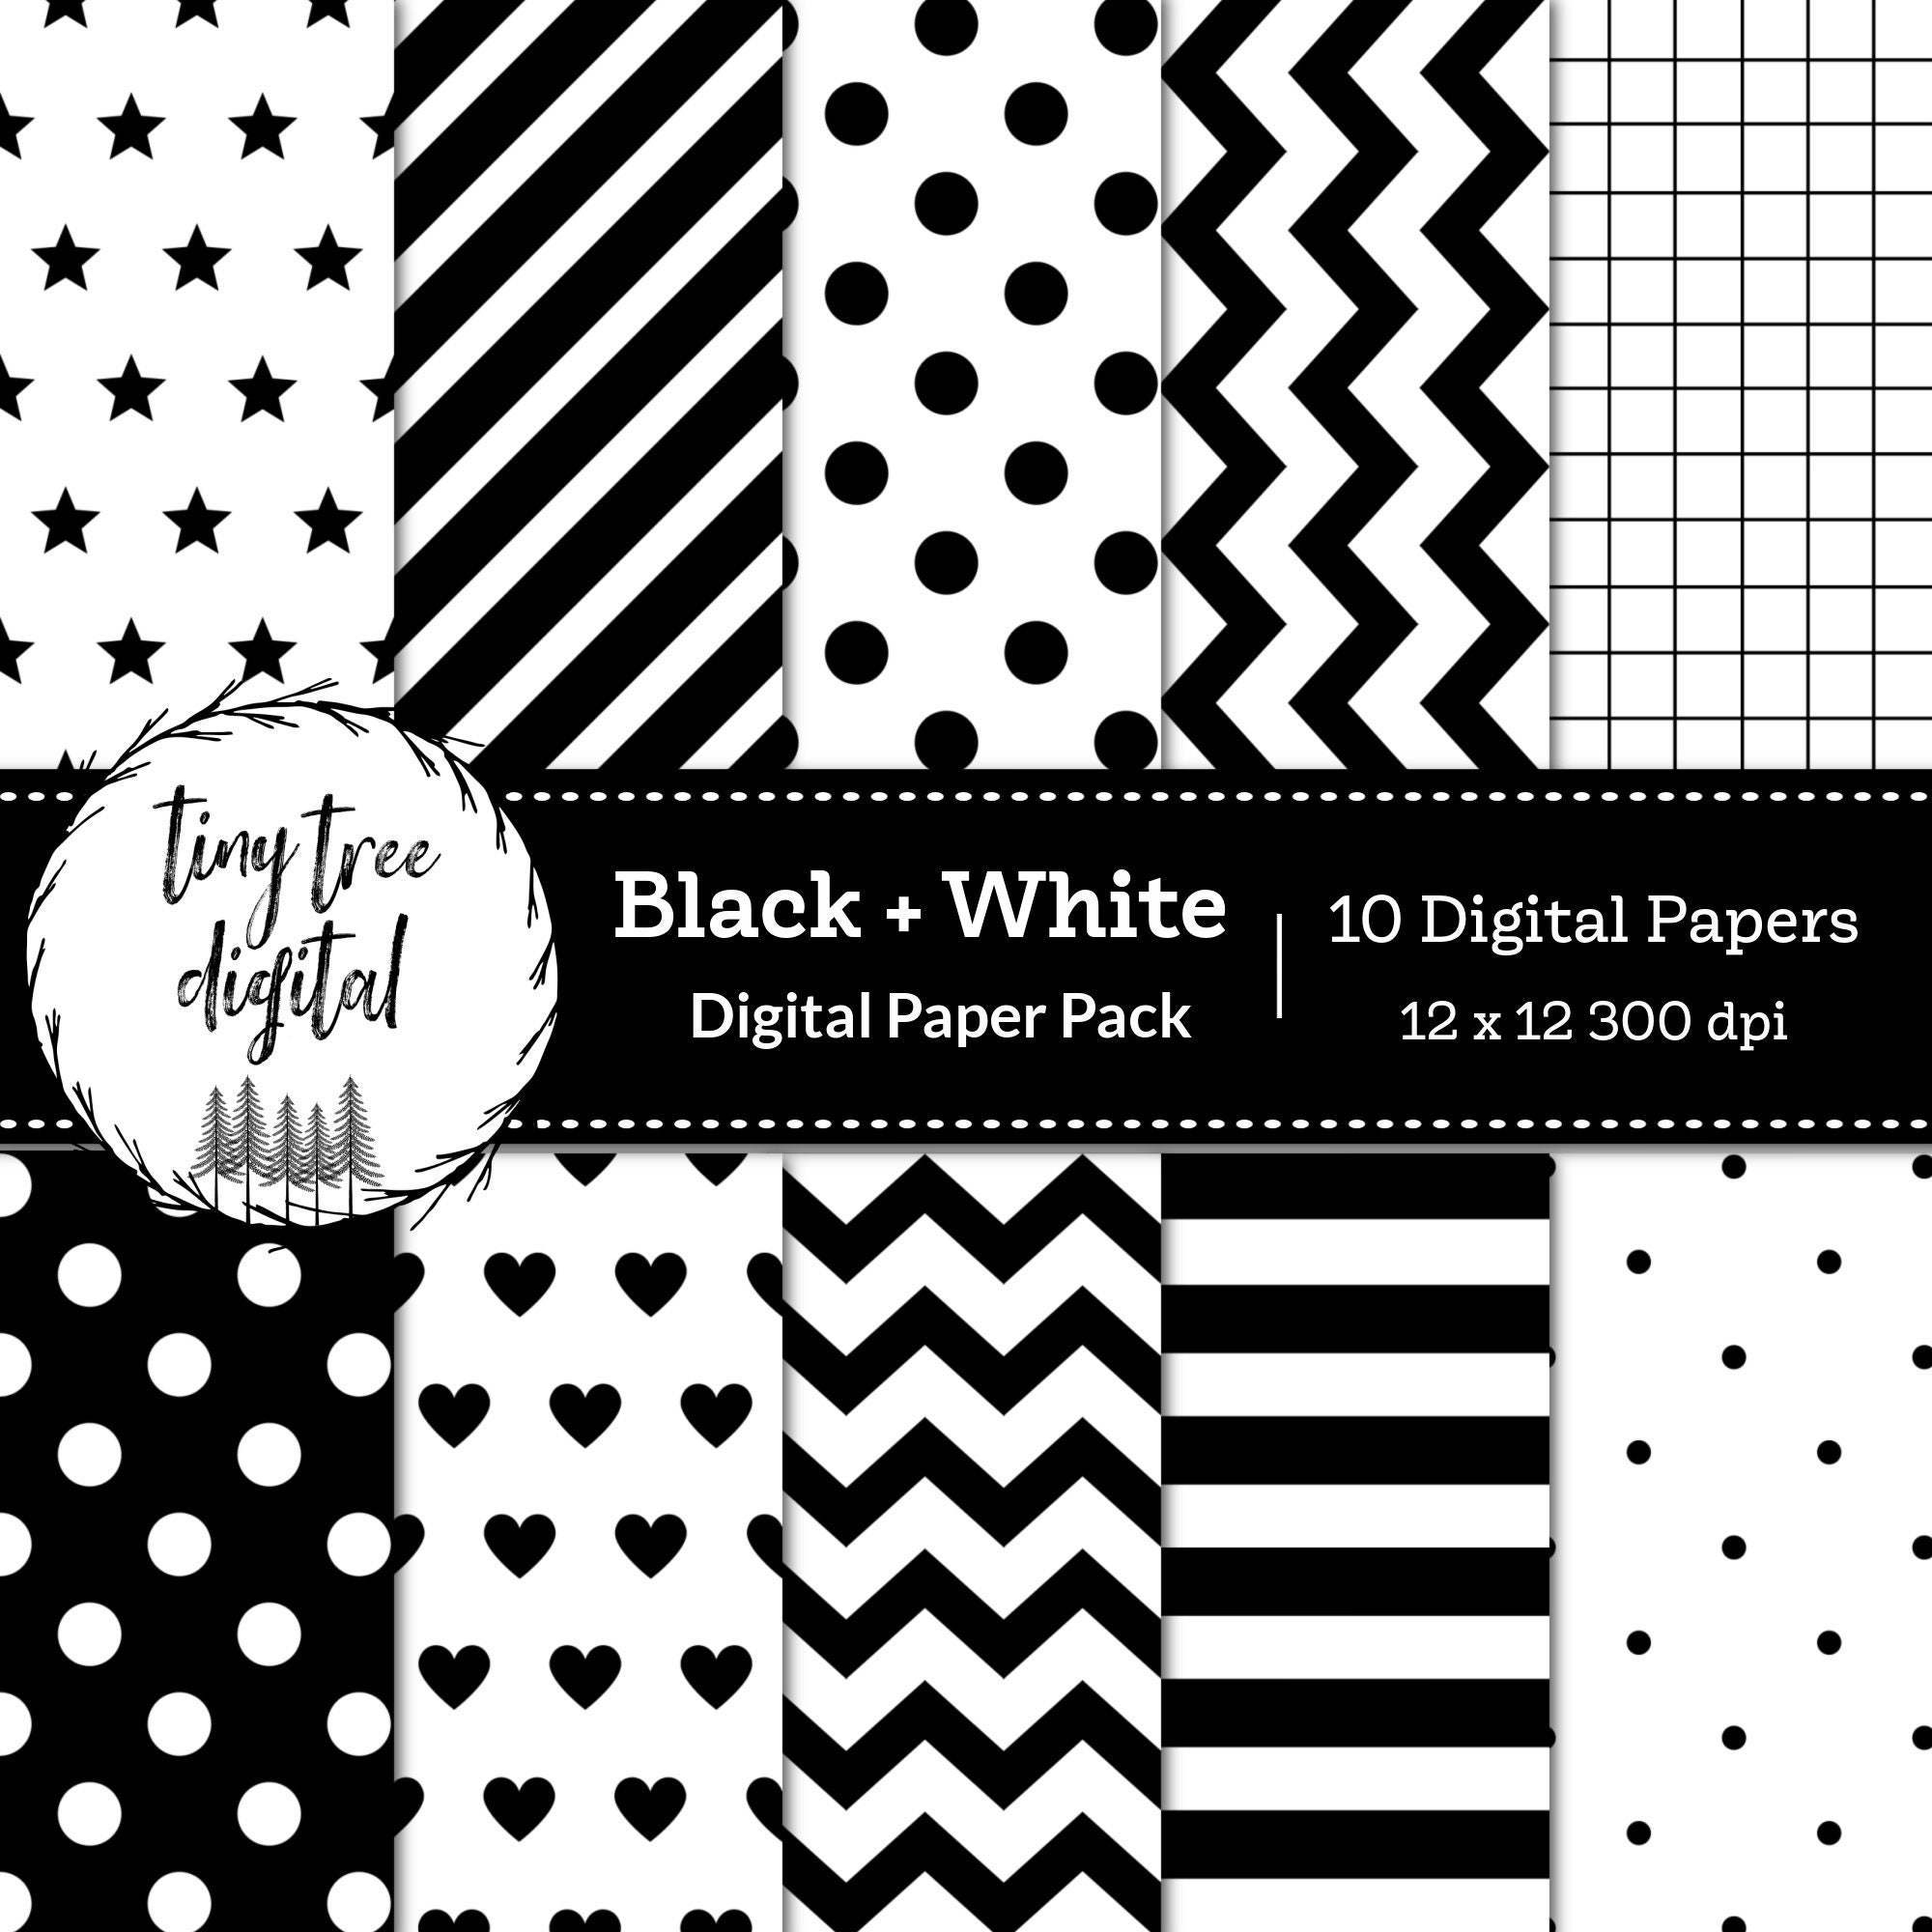 TONS of FREE Digital Paper You'll Want To Use NOW! - A Country